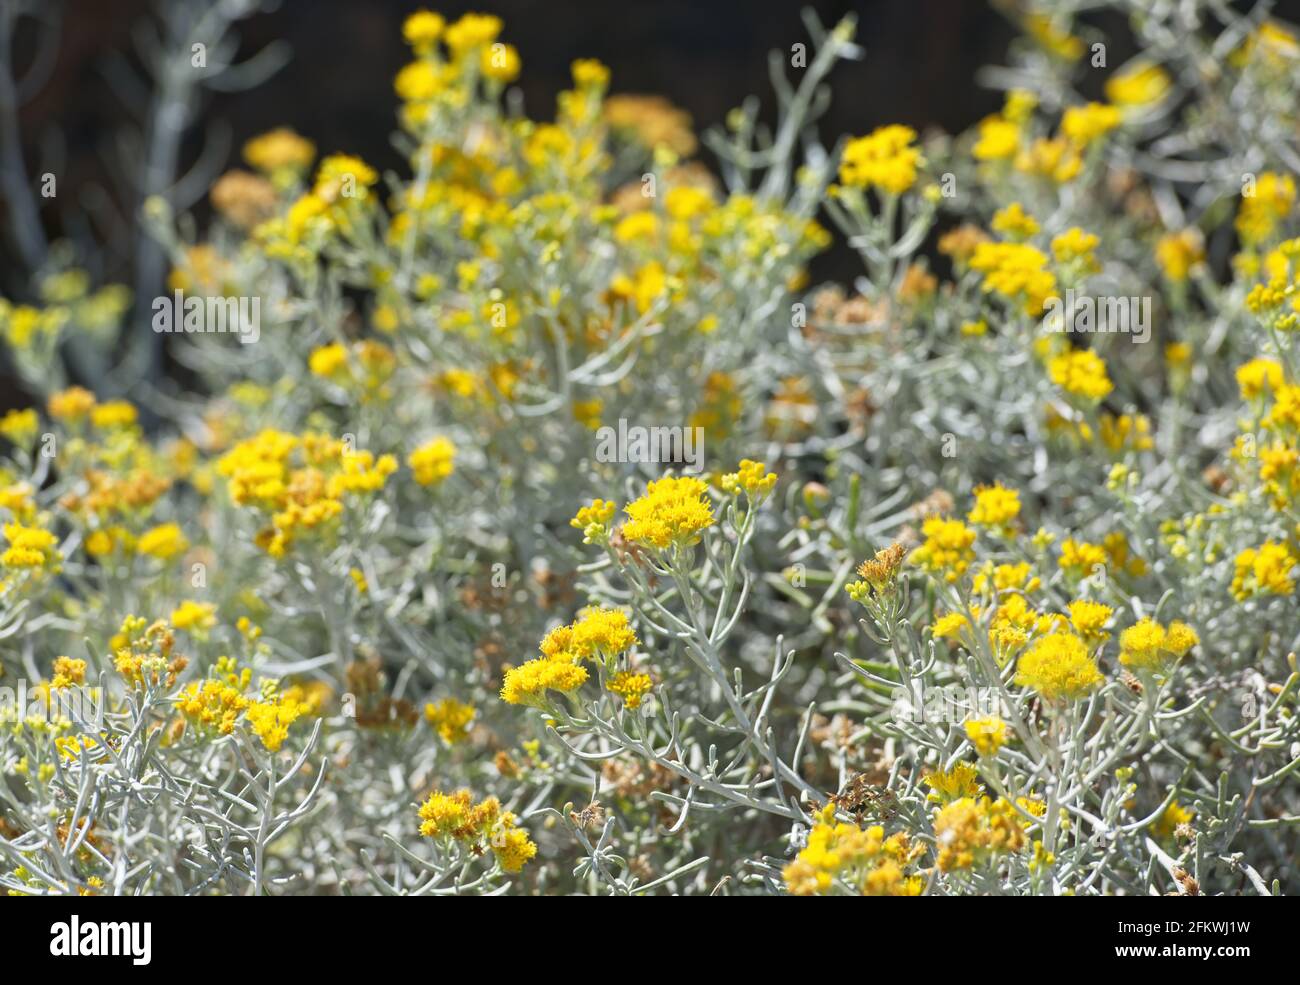 background of common wormwood (Artemisia absinthium)- is a species of Artemisia native to temperate regions of Eurasia and Northern Africa. Central Stock Photo